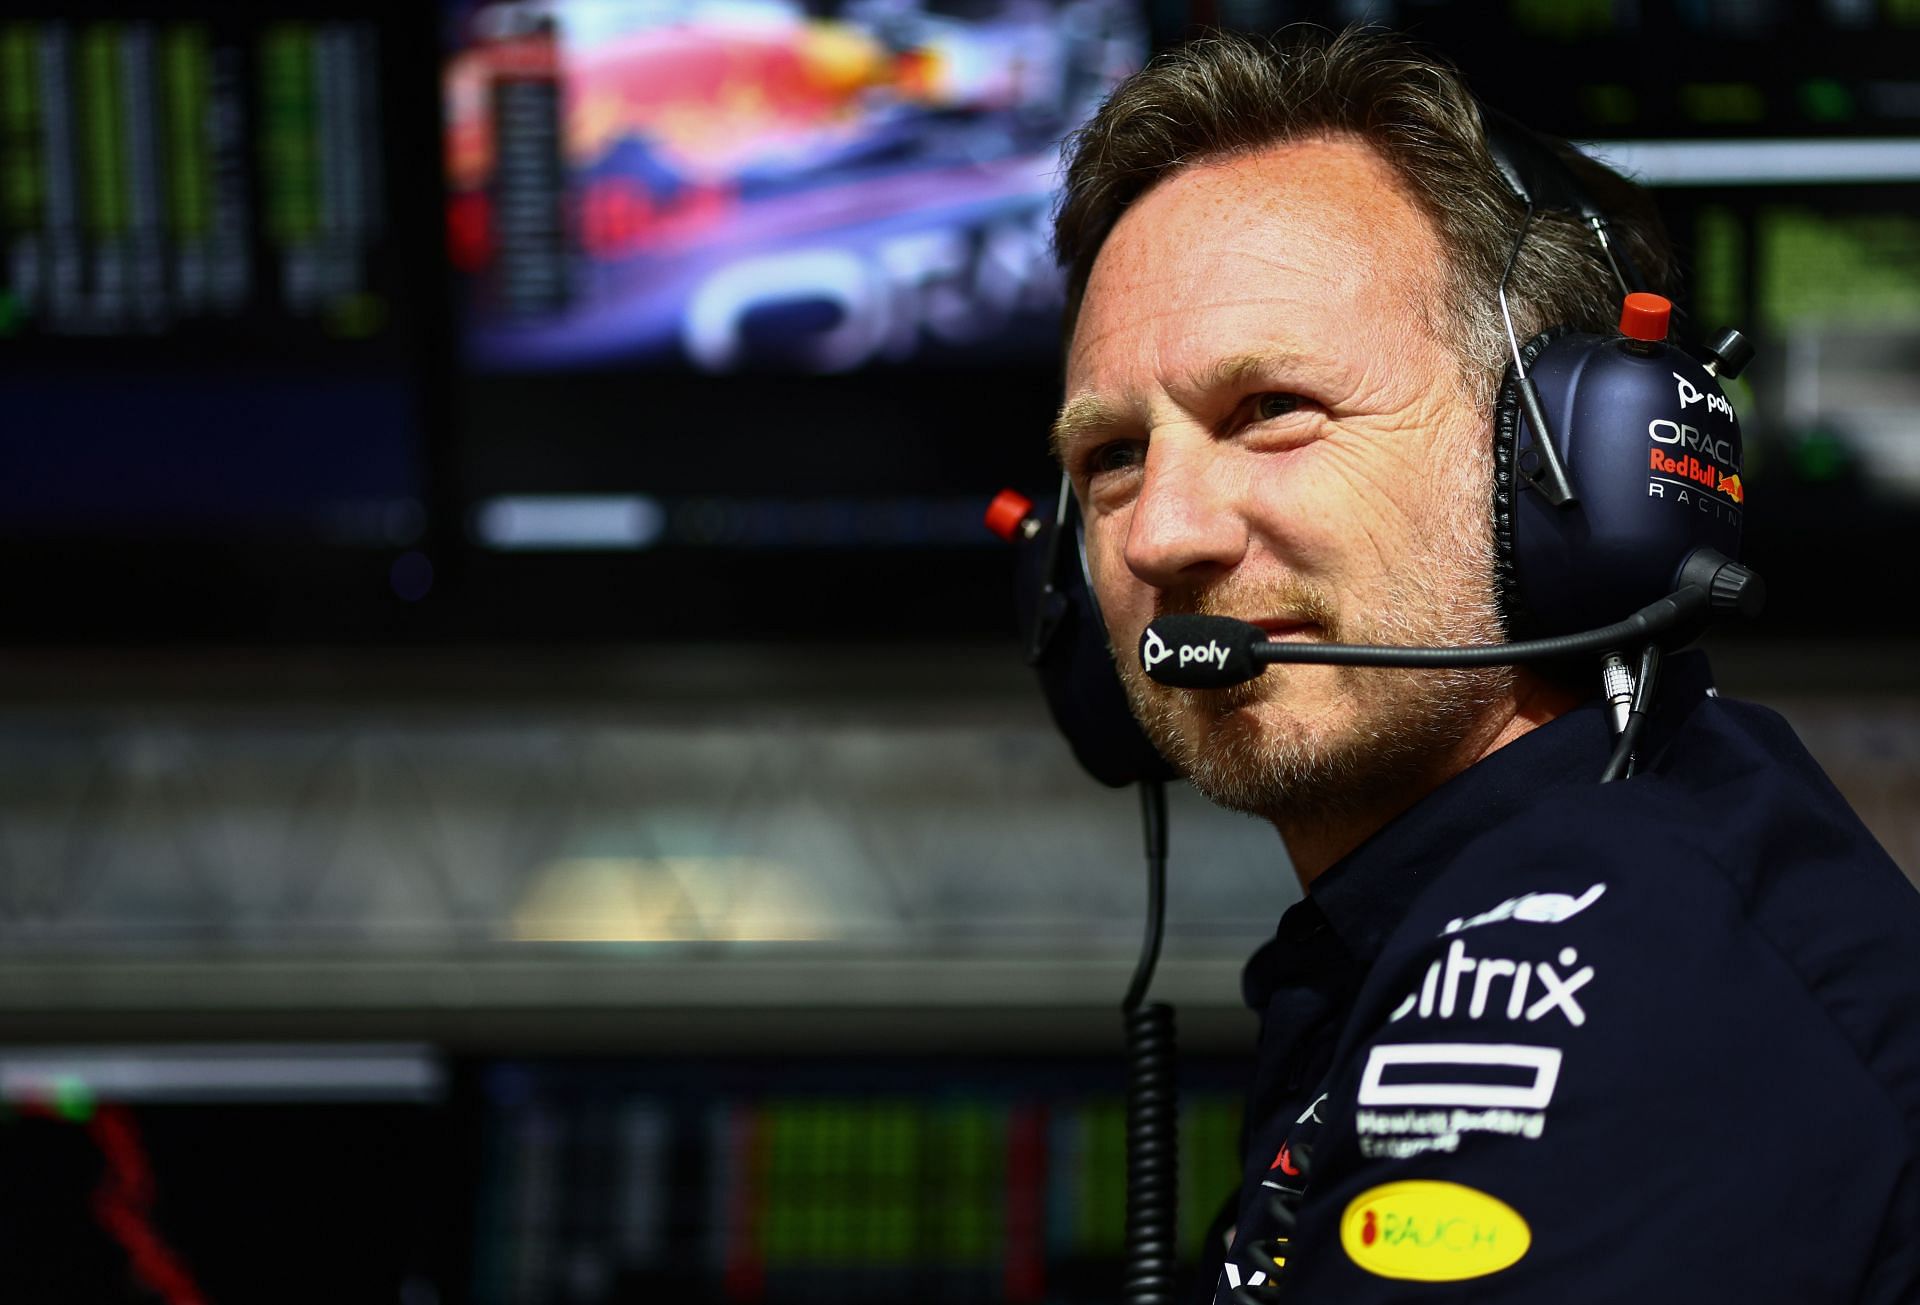 Red Bull Racing Team Principal Christian Horner looks on from the pitwall during qualifying ahead of the F1 Grand Prix of Saudi Arabia at the Jeddah Corniche Circuit on March 26, 2022 in Jeddah, Saudi Arabia. (Photo by Mark Thompson/Getty Images)